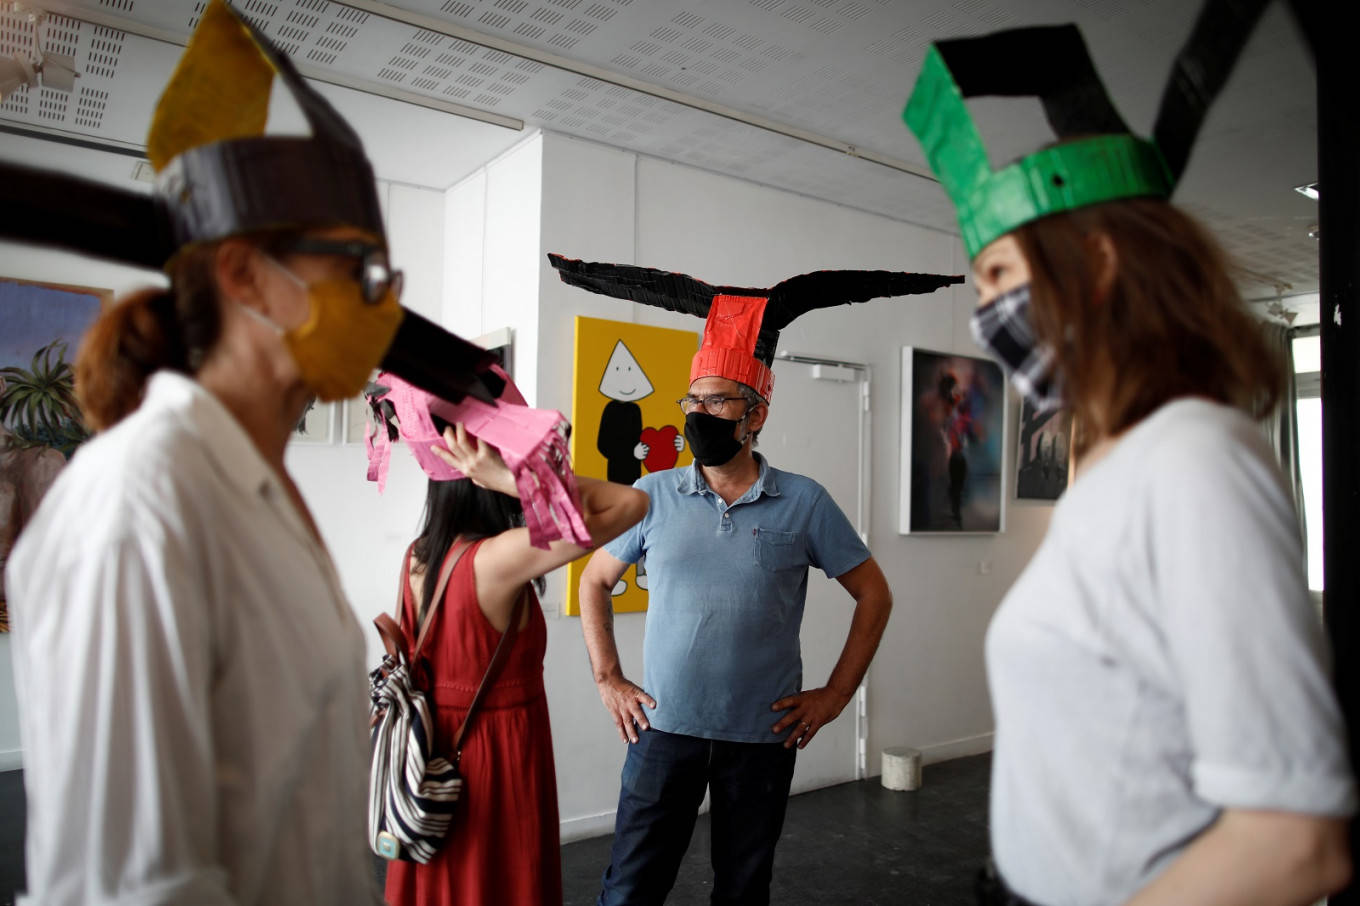 Special hats in this Paris art gallery will help maintain social distancing